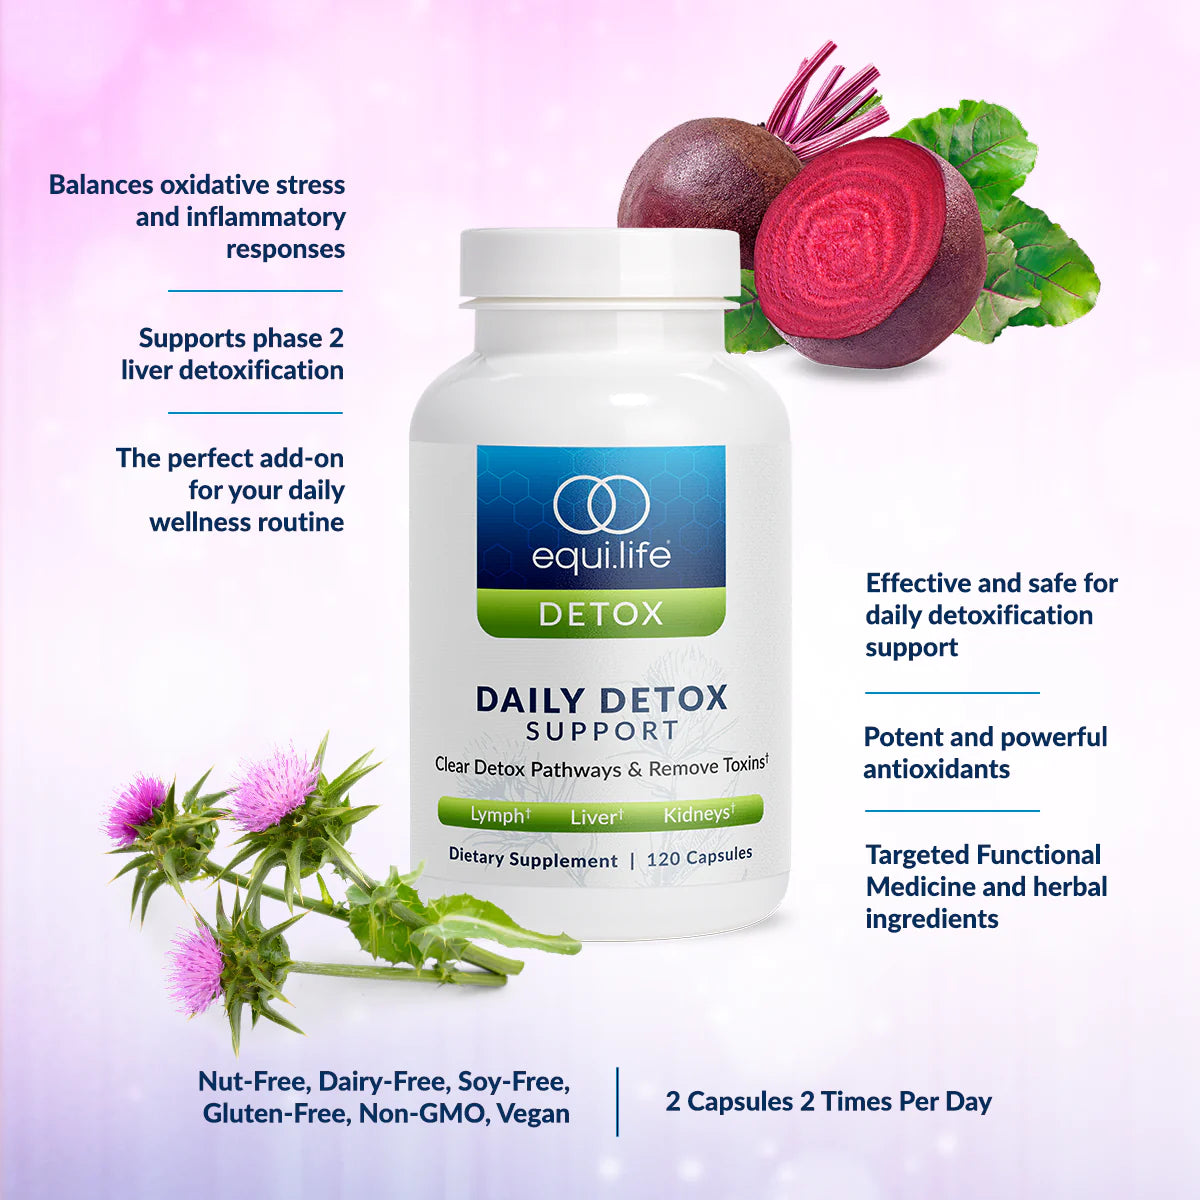 Daily Detox Support by Equilife